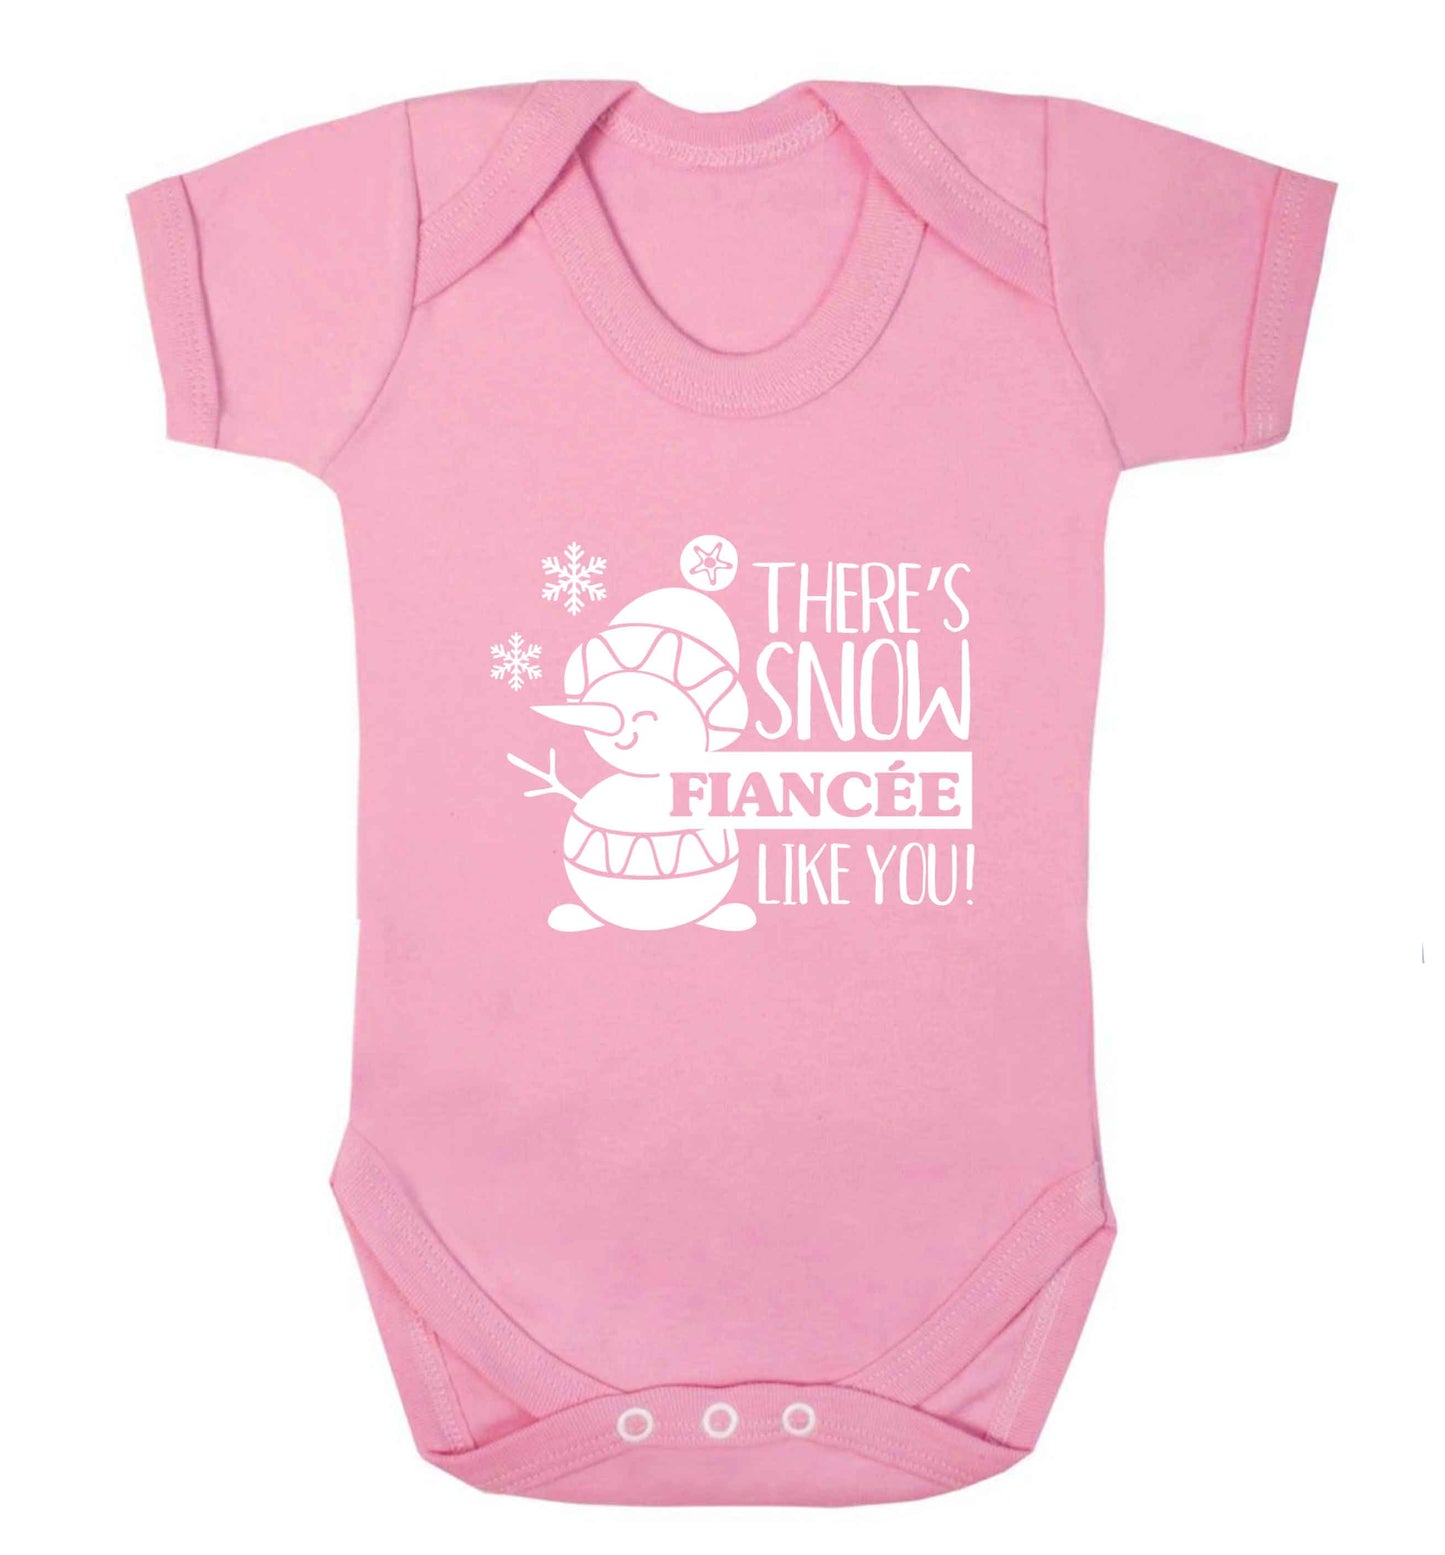 There's snow fiancee like you baby vest pale pink 18-24 months